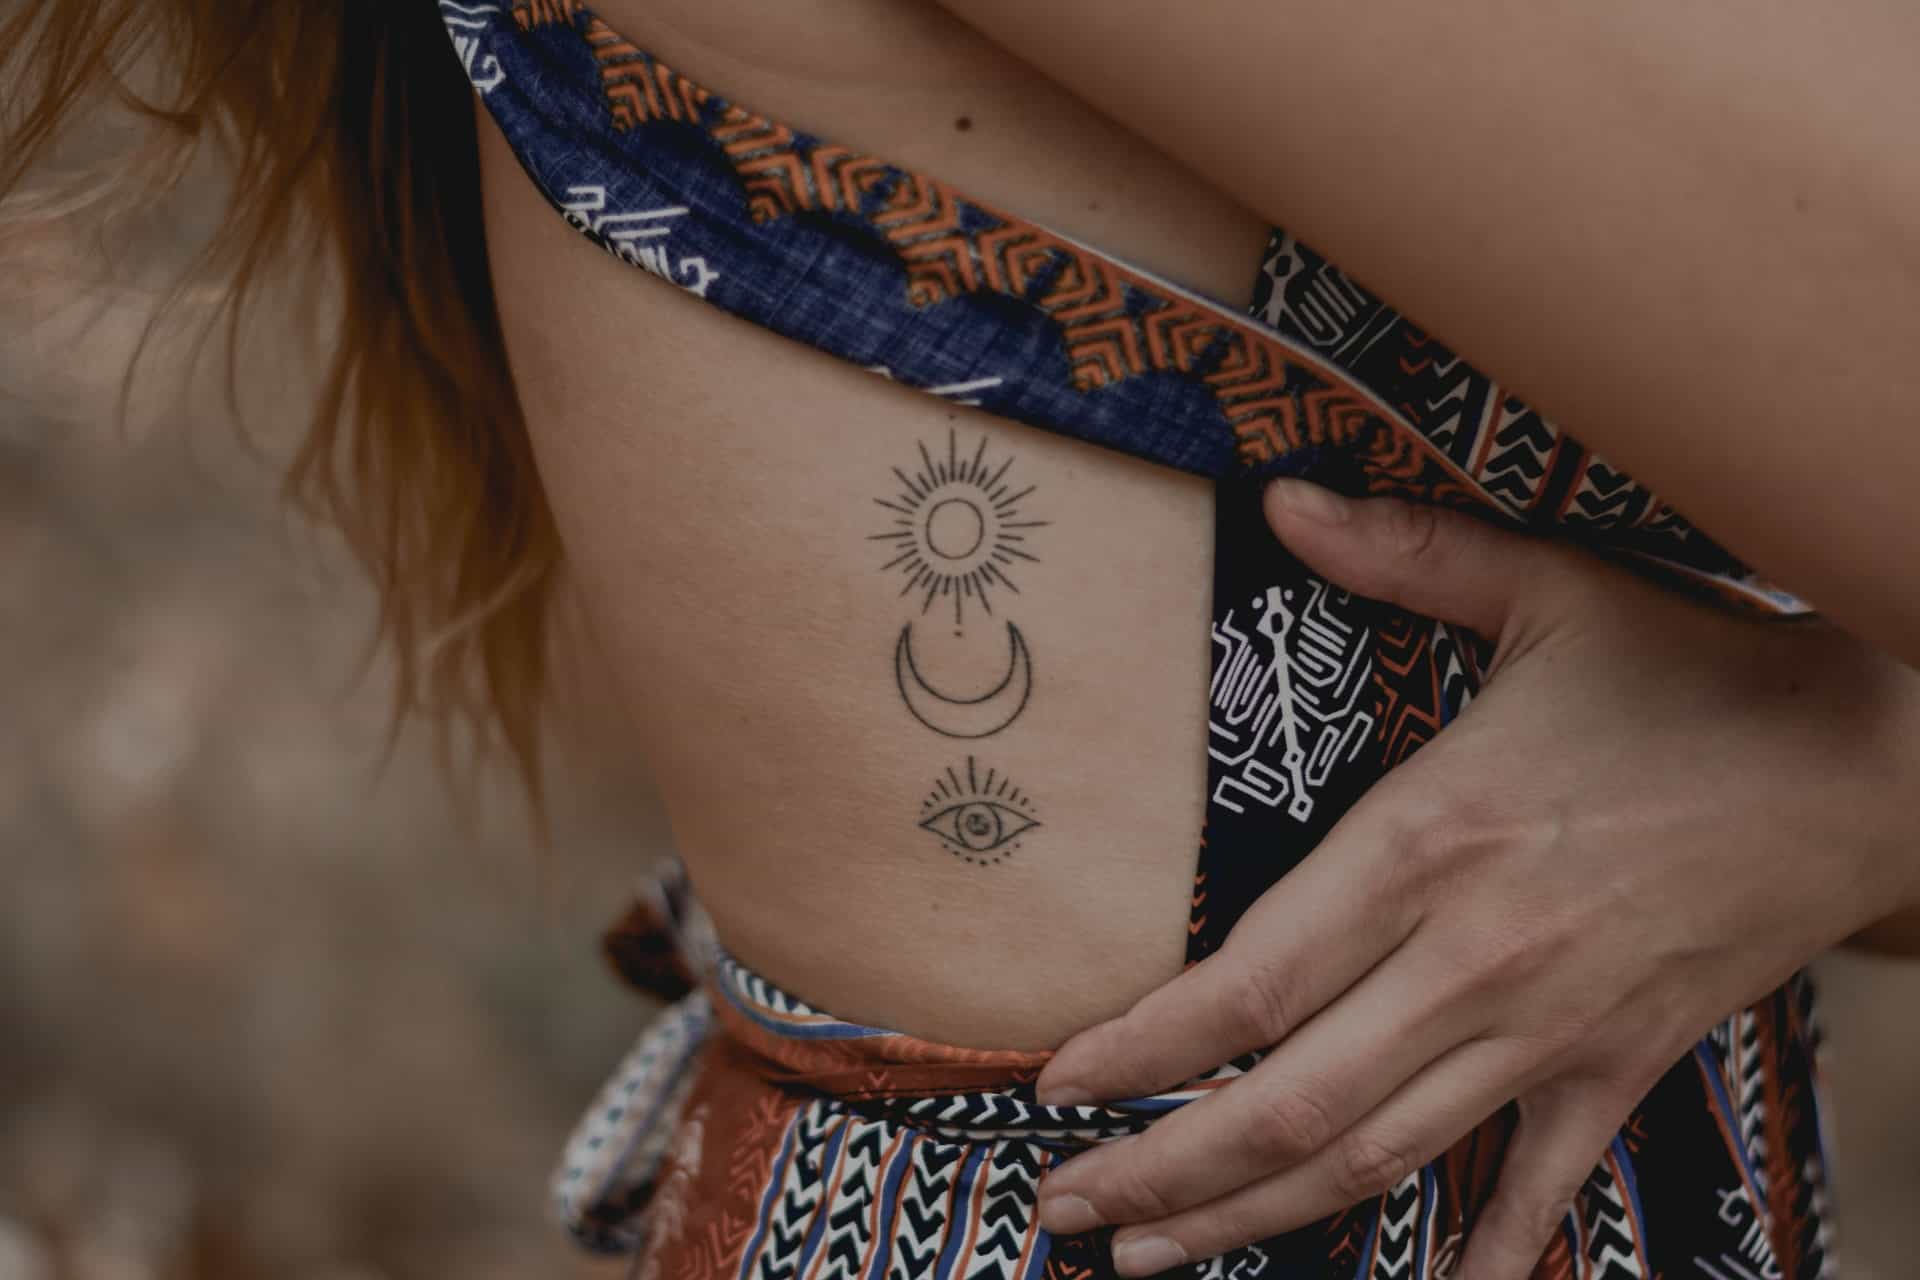 Mini-tattoos are still on trend. What designs will work best? Here are some inspirations